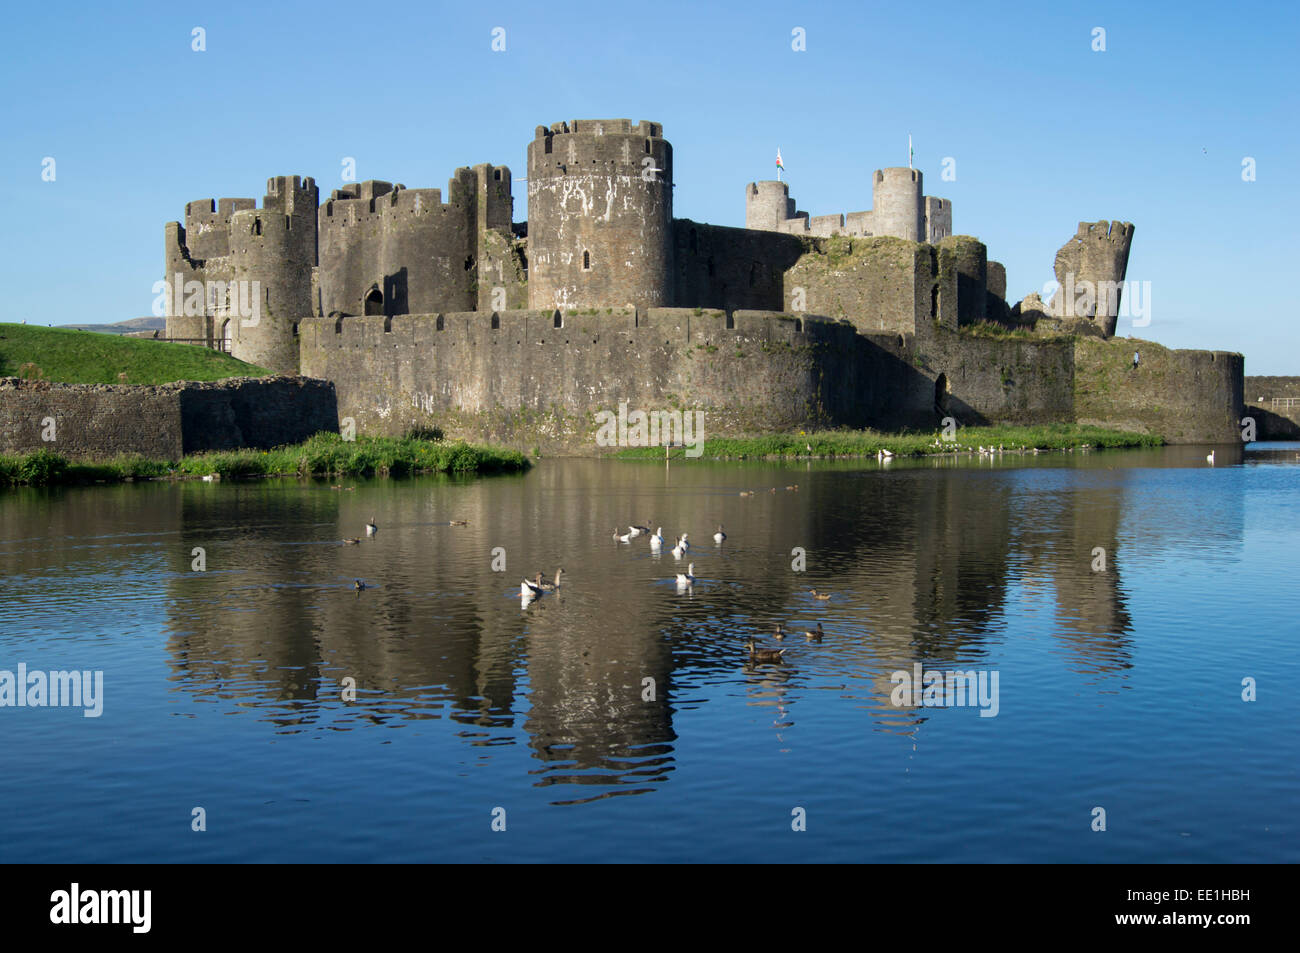 Château de Caerphilly, Caerphilly, Glamorgan, Pays de Galles, Royaume-Uni, Europe Banque D'Images